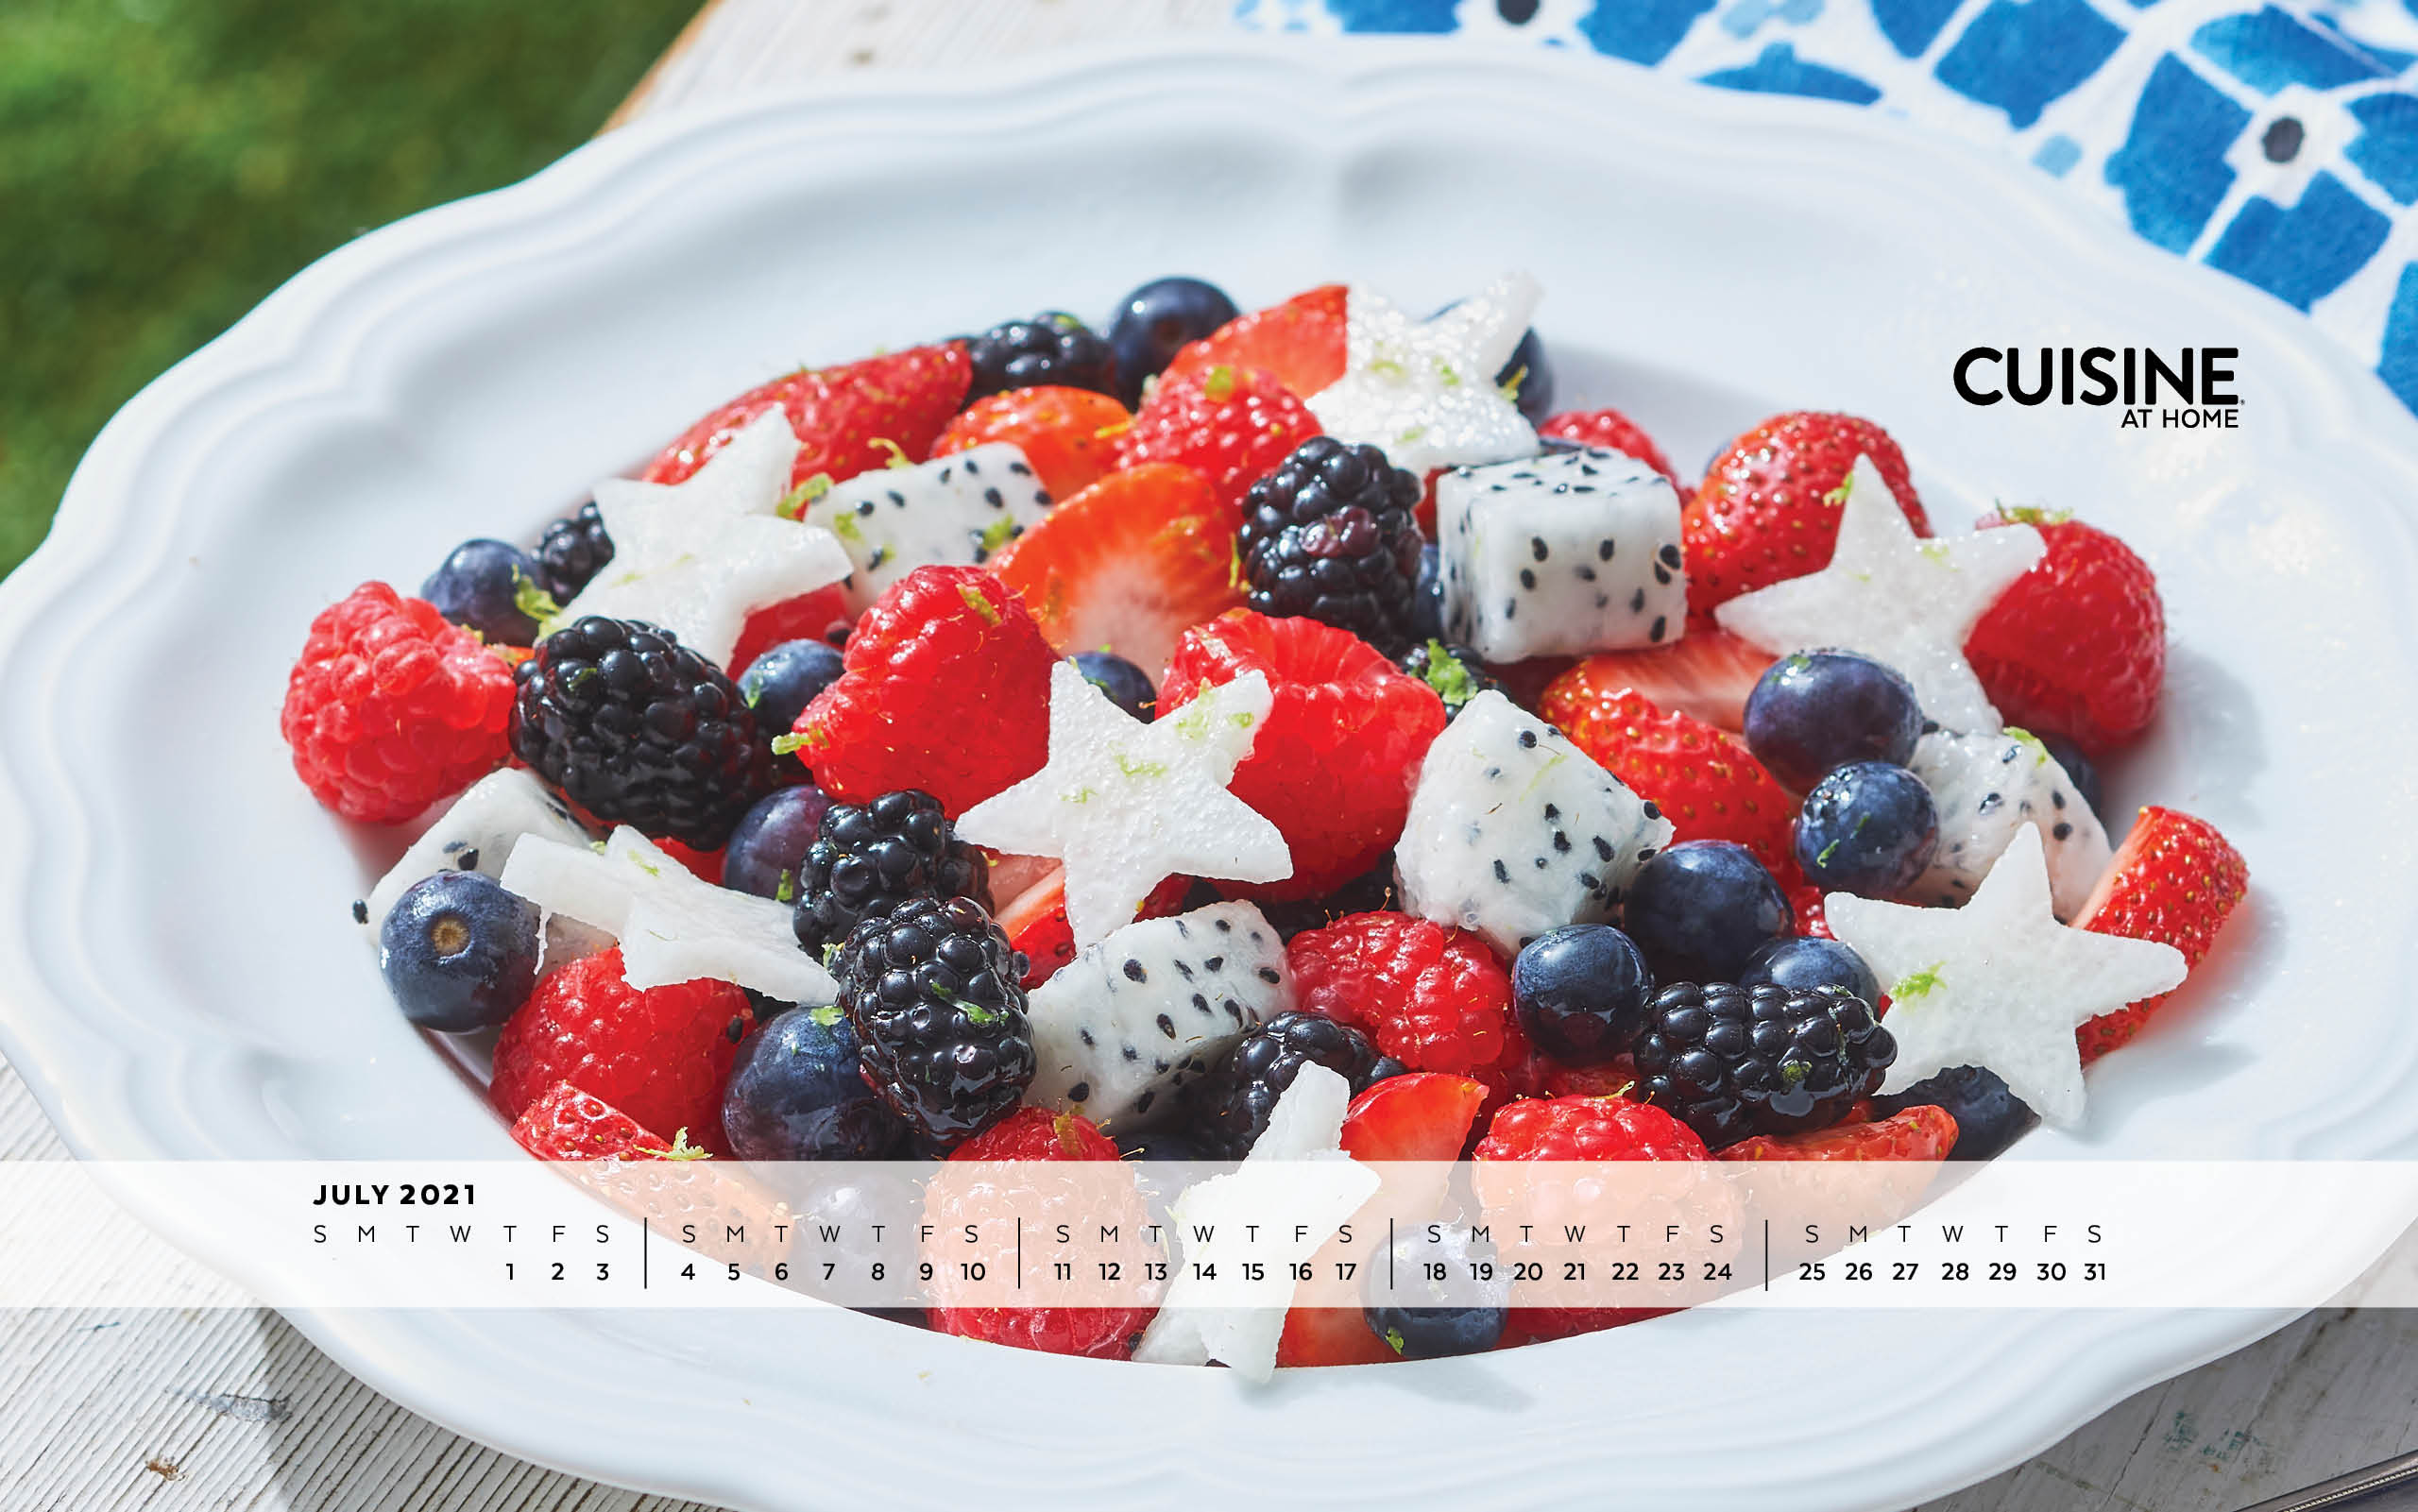 Free Desktop Wallpaper with calendar - July 2021 - Cuisine at Home - Summer aesthetic food red, white and blue fruit salad with stars and berries colorful cooking